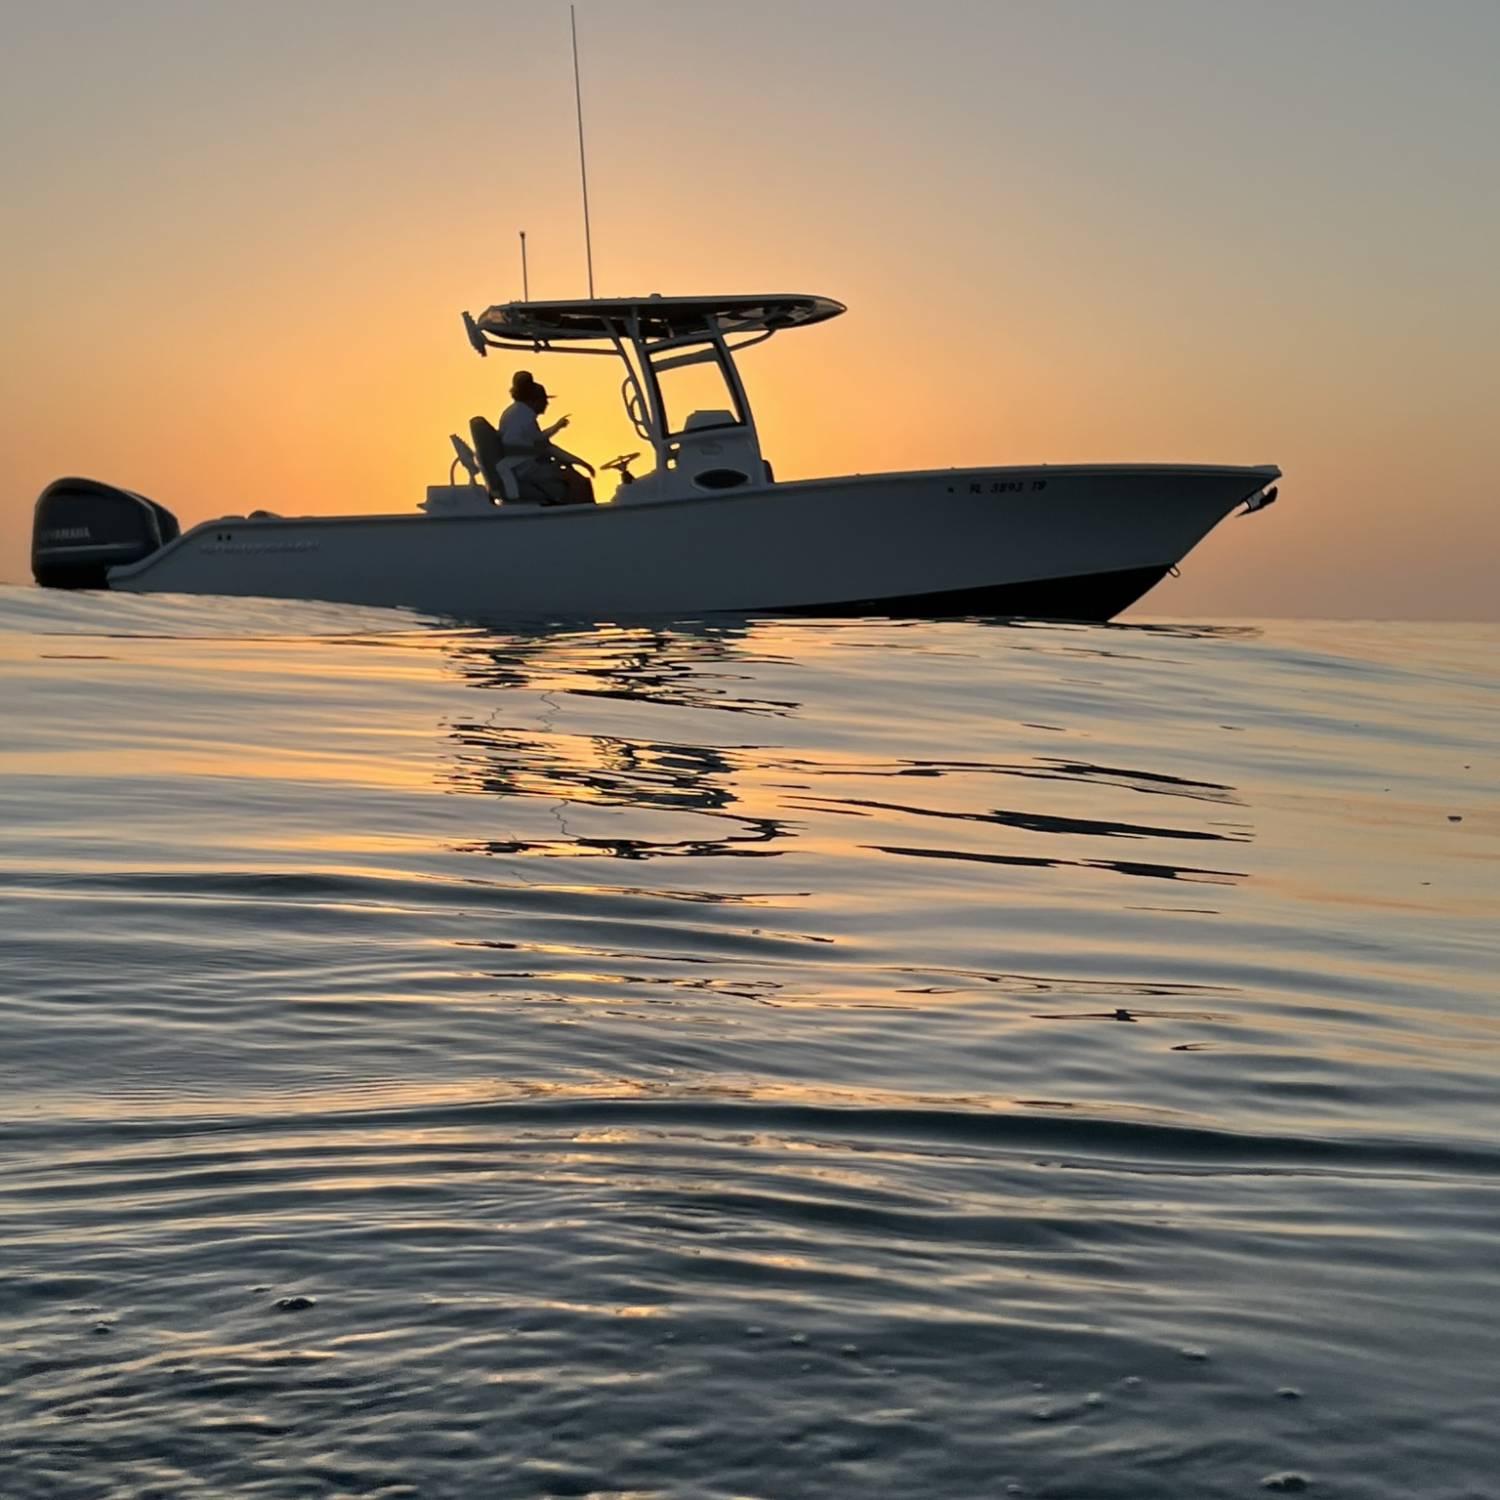 Title: Golden Hour - On board their Sportsman Open 282 Center Console - Location: Naples, FL. Participating in the Photo Contest #SportsmanMarch2023